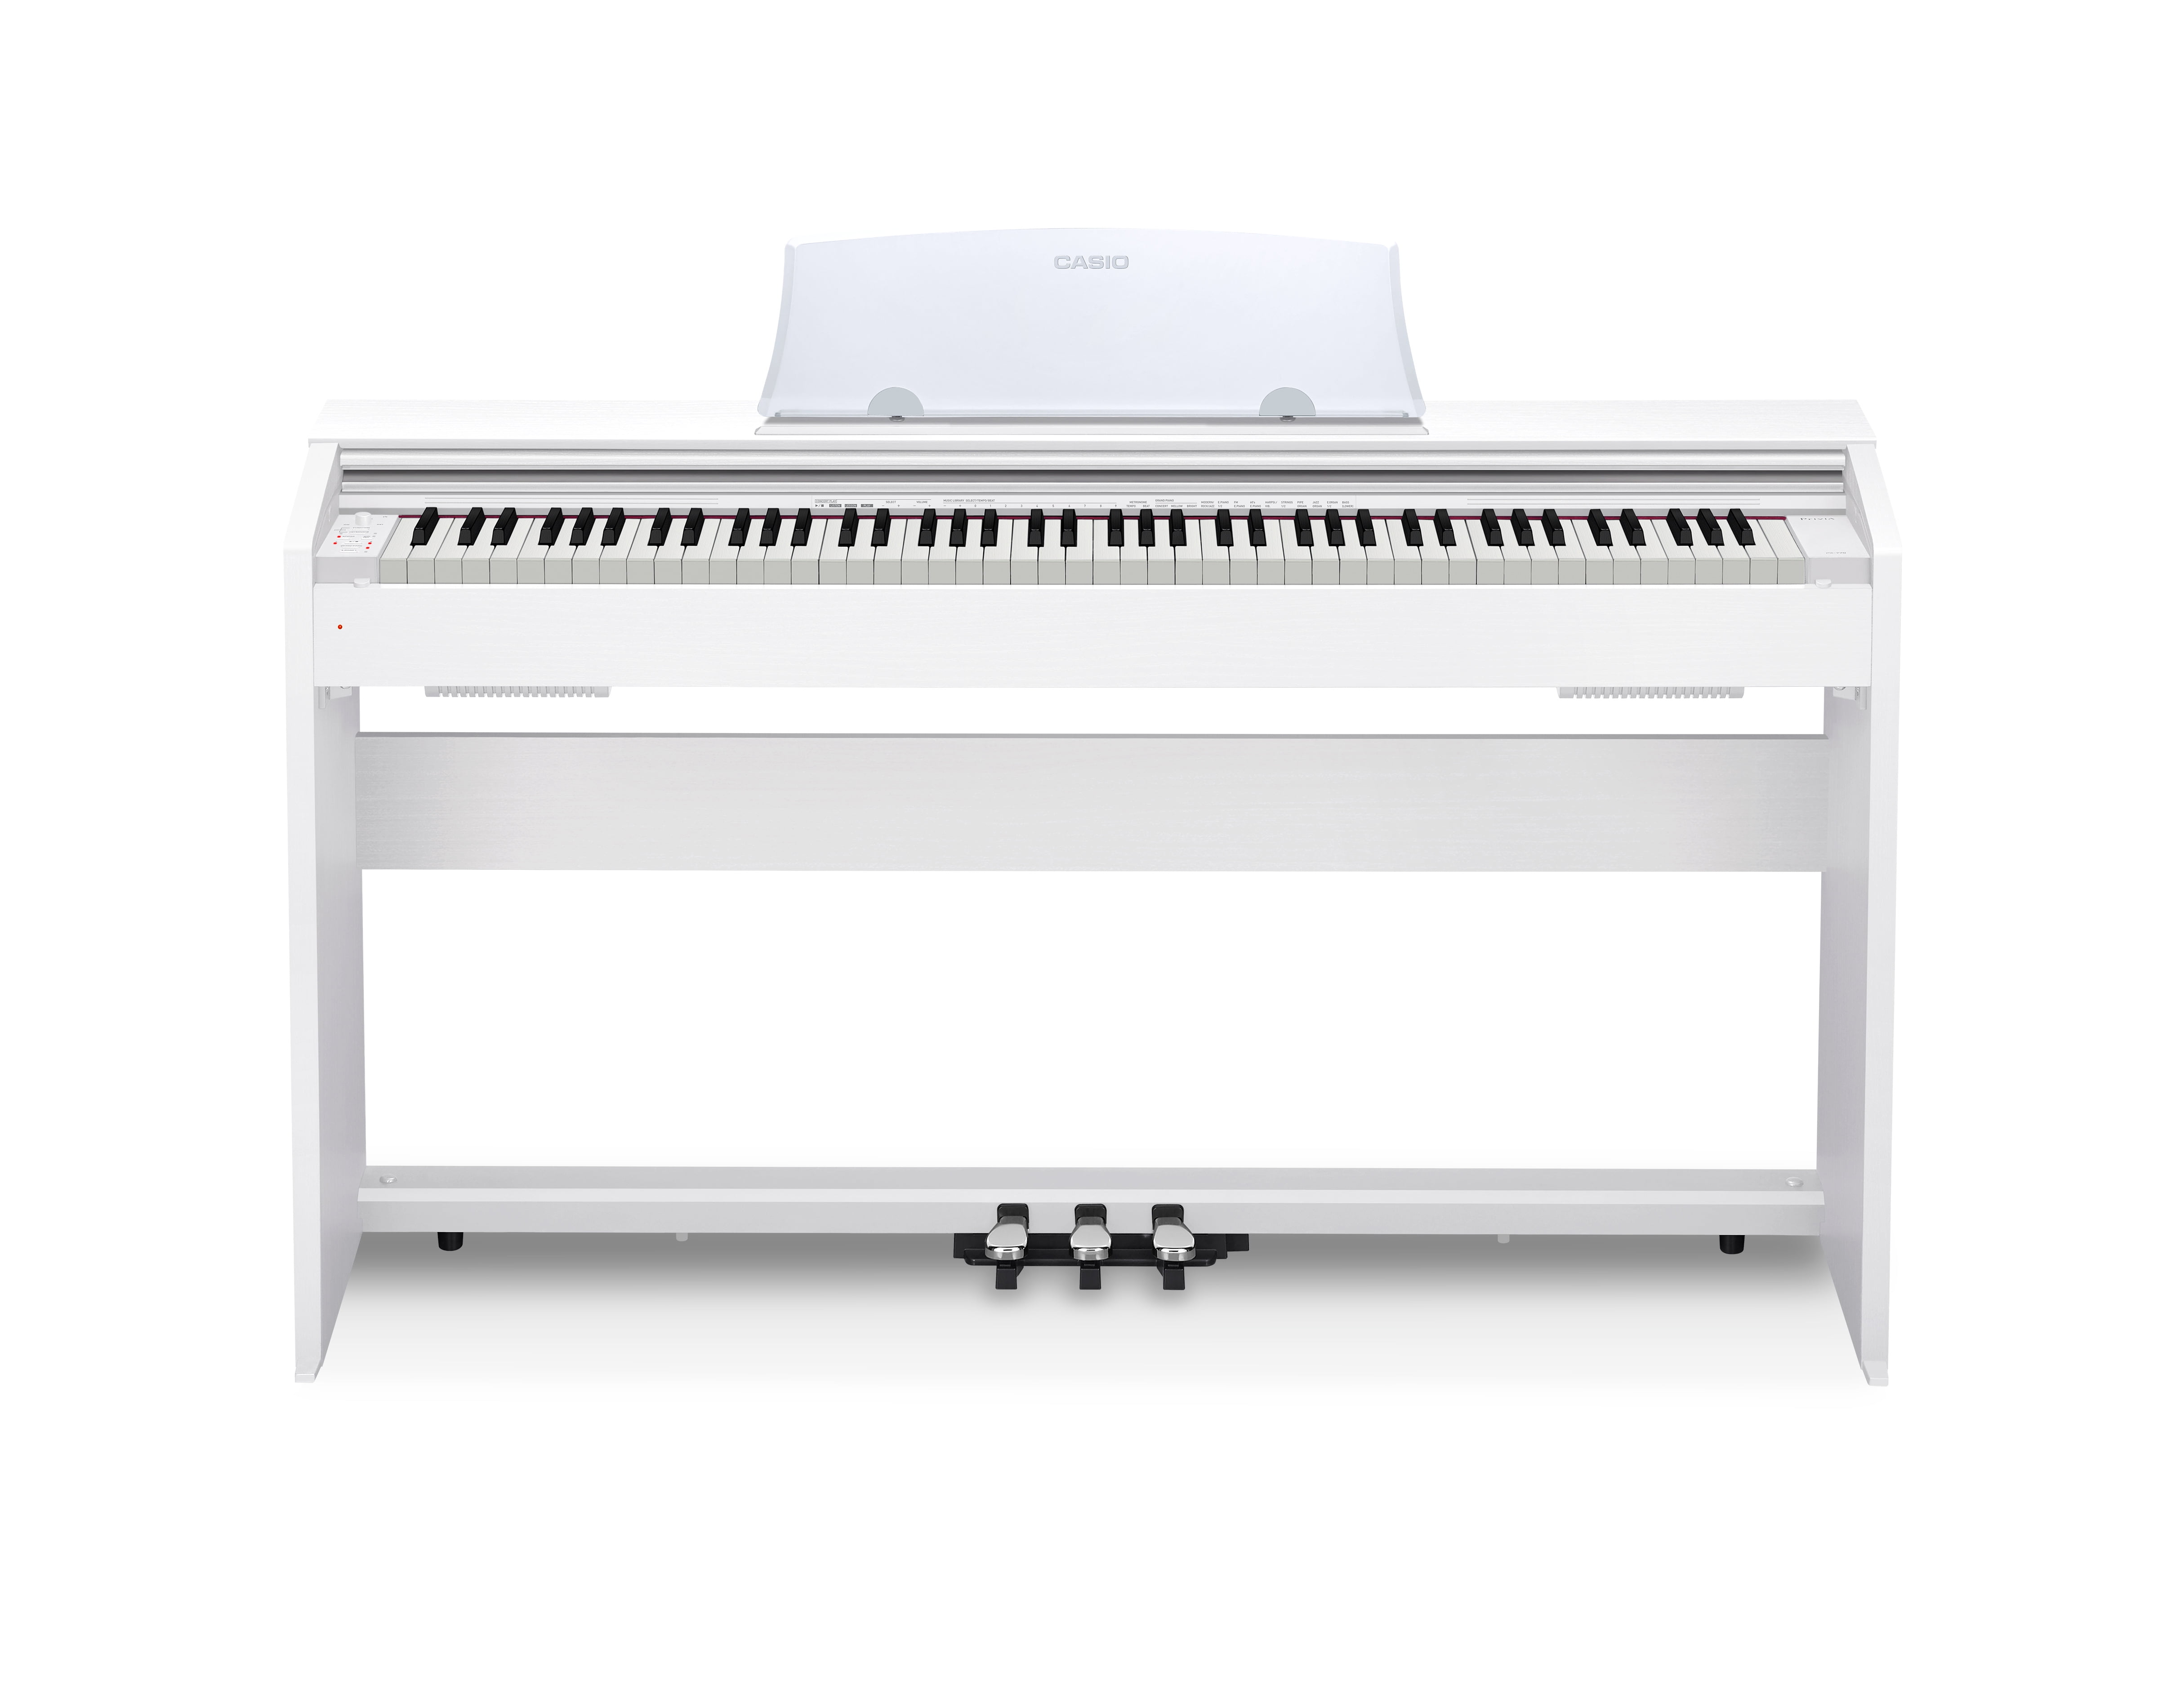 Casio PX770 WH Privia Digital Piano with 88 scaled, weighted hammer-action keys, White - Walmart.com